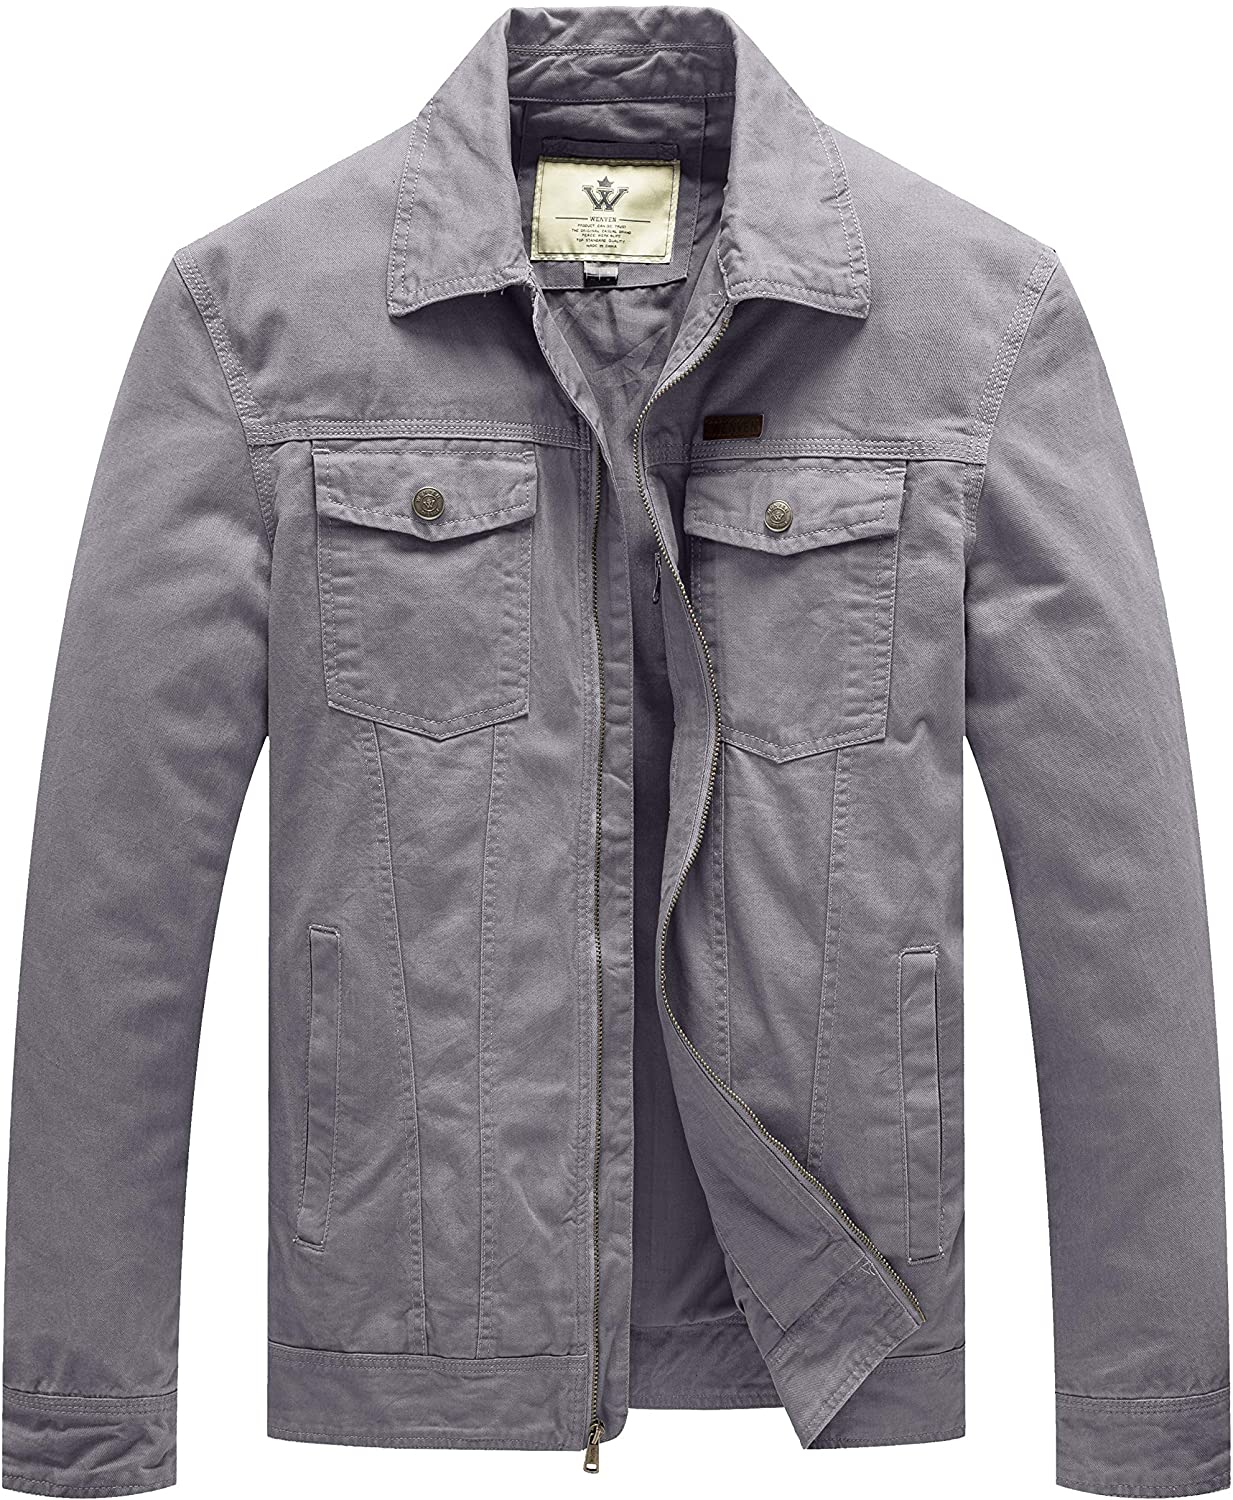 WenVen Mens Casual Washed Cotton Military Jacket 